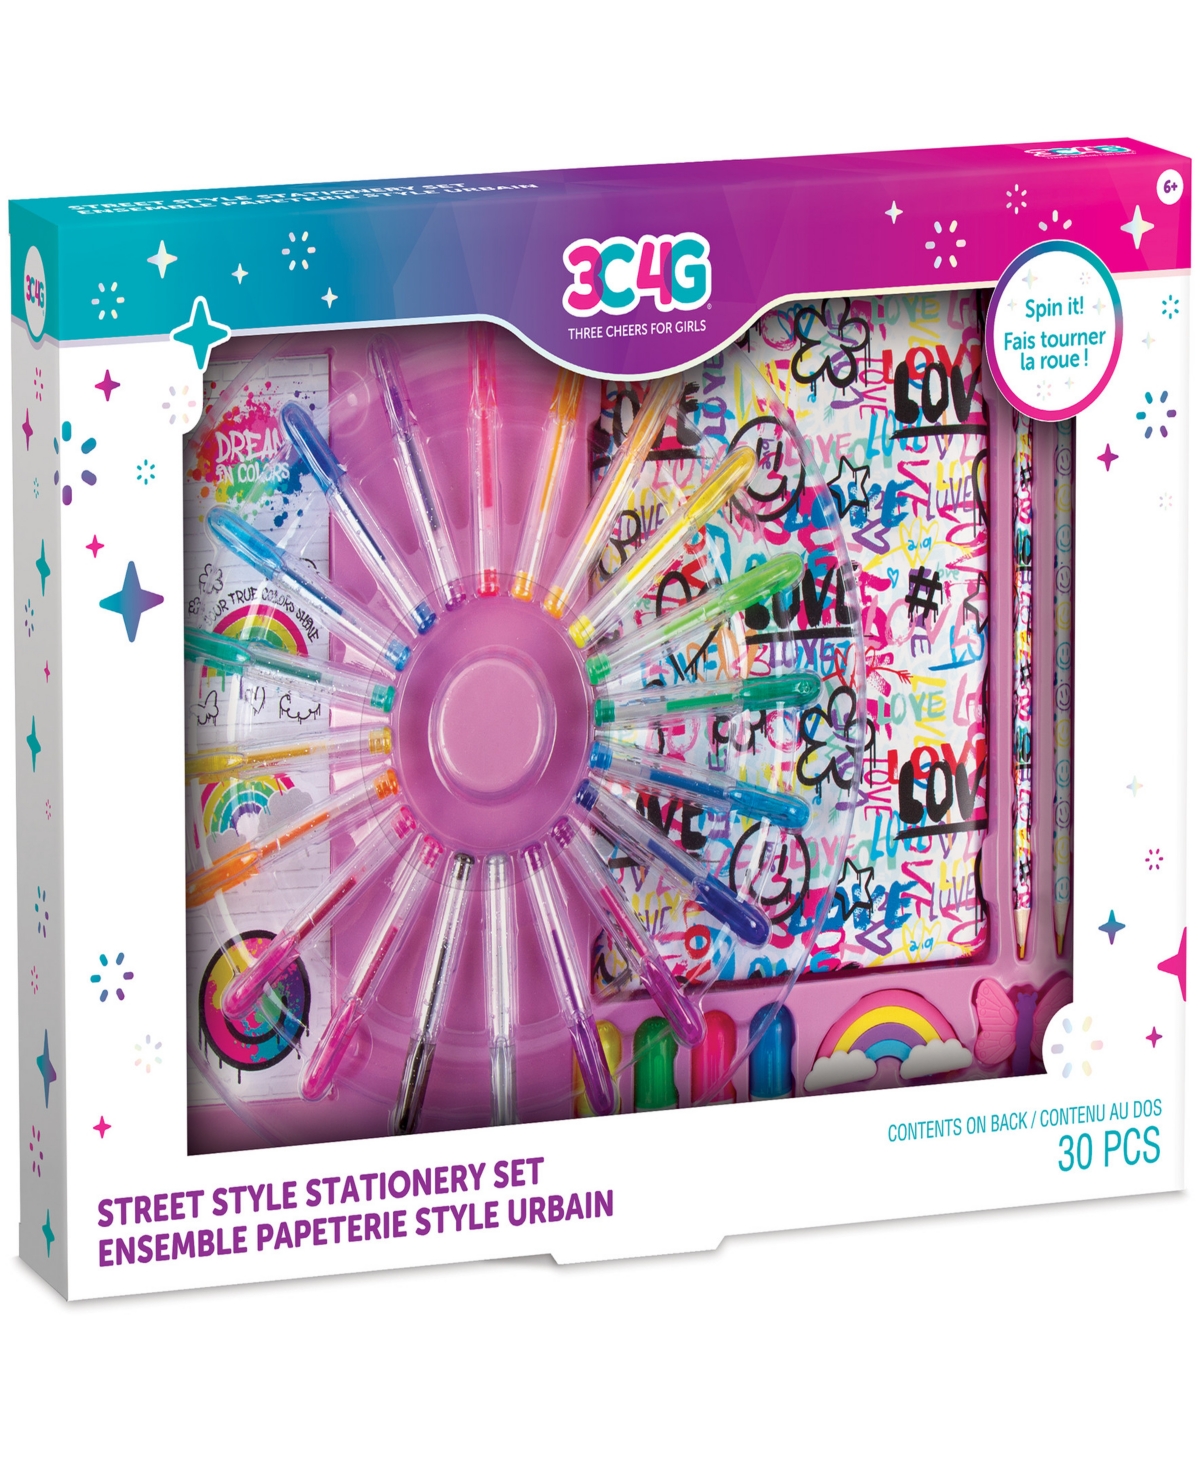 Three Cheers For Girls 3c4g: Street Style Stationery 30 Piece Set, Make It Real, Teens Tweens Girls, 160 Page Lined Journal In Multi